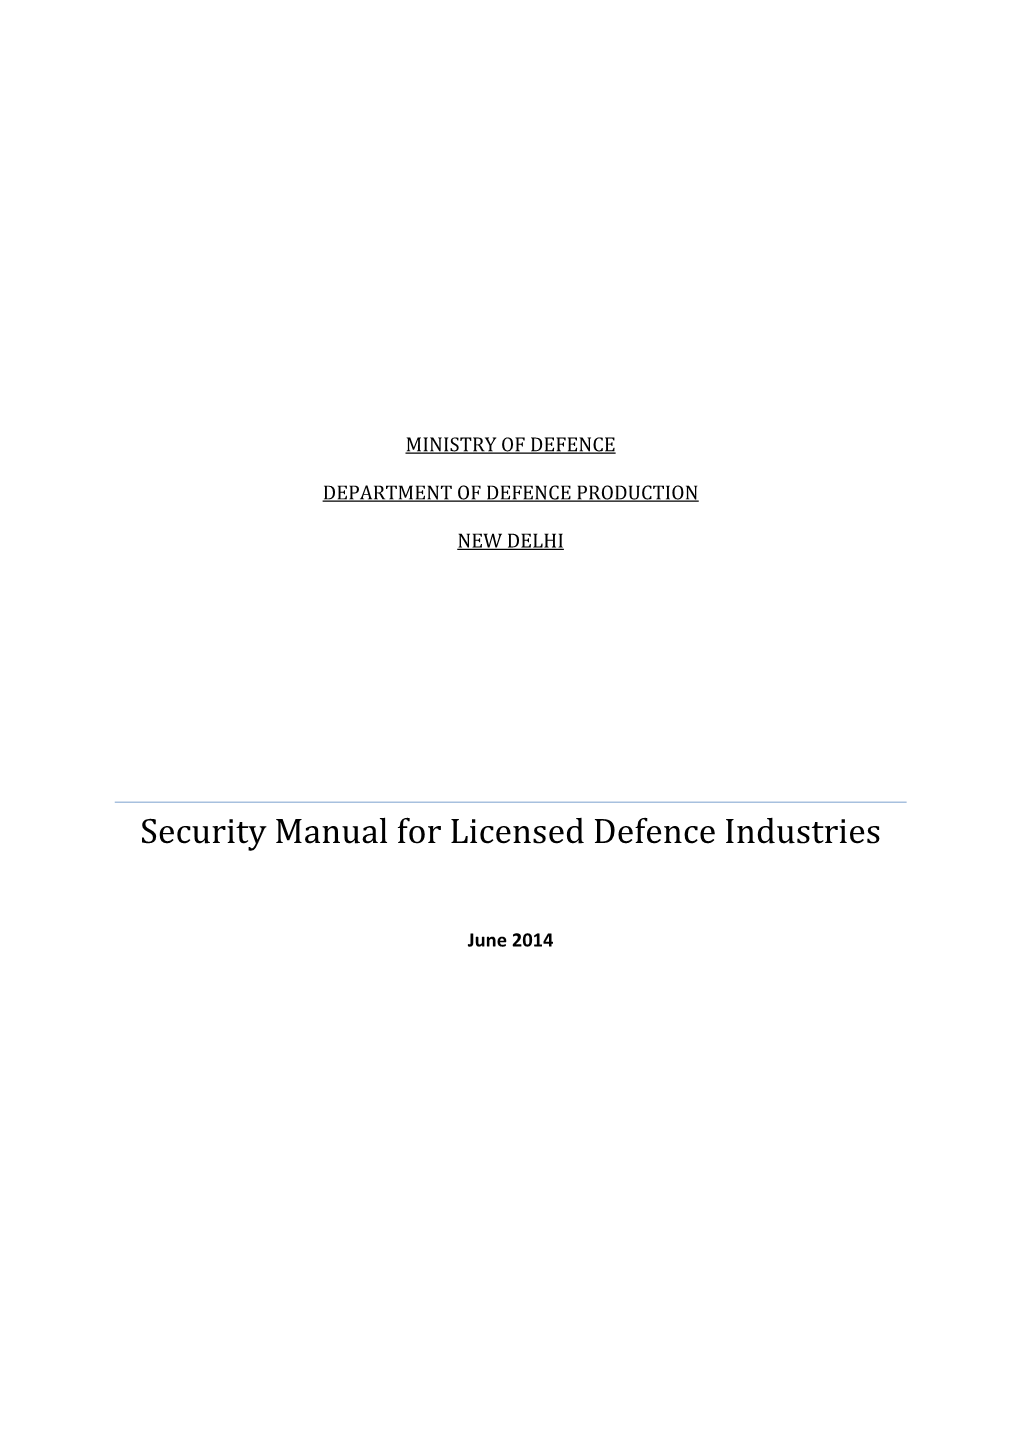 Security Manual for Licensed Defence Industries